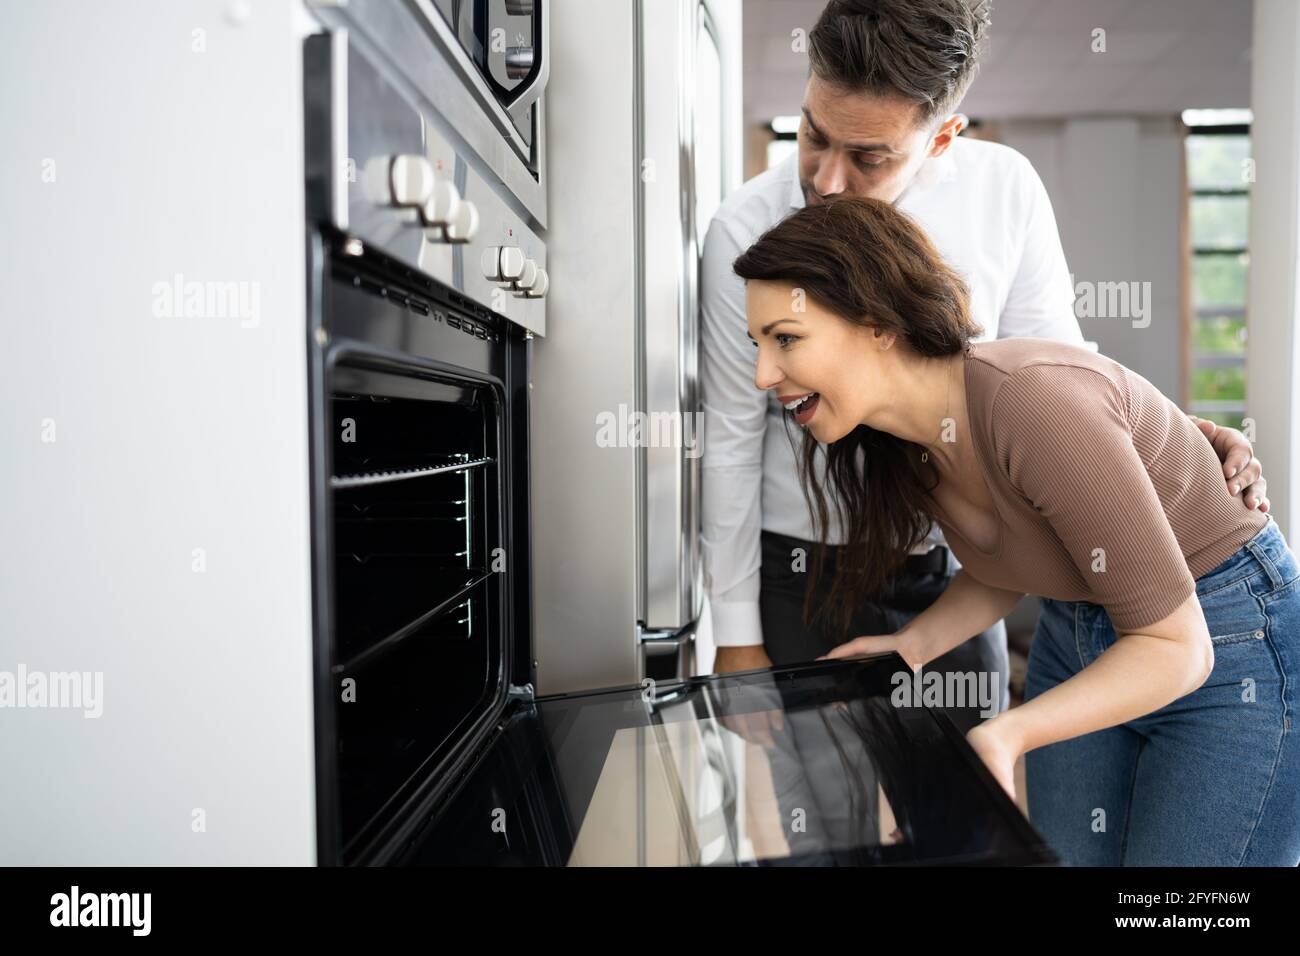 Couple Buying Electrical Oven With Consumer Loan Credit Stock Photo